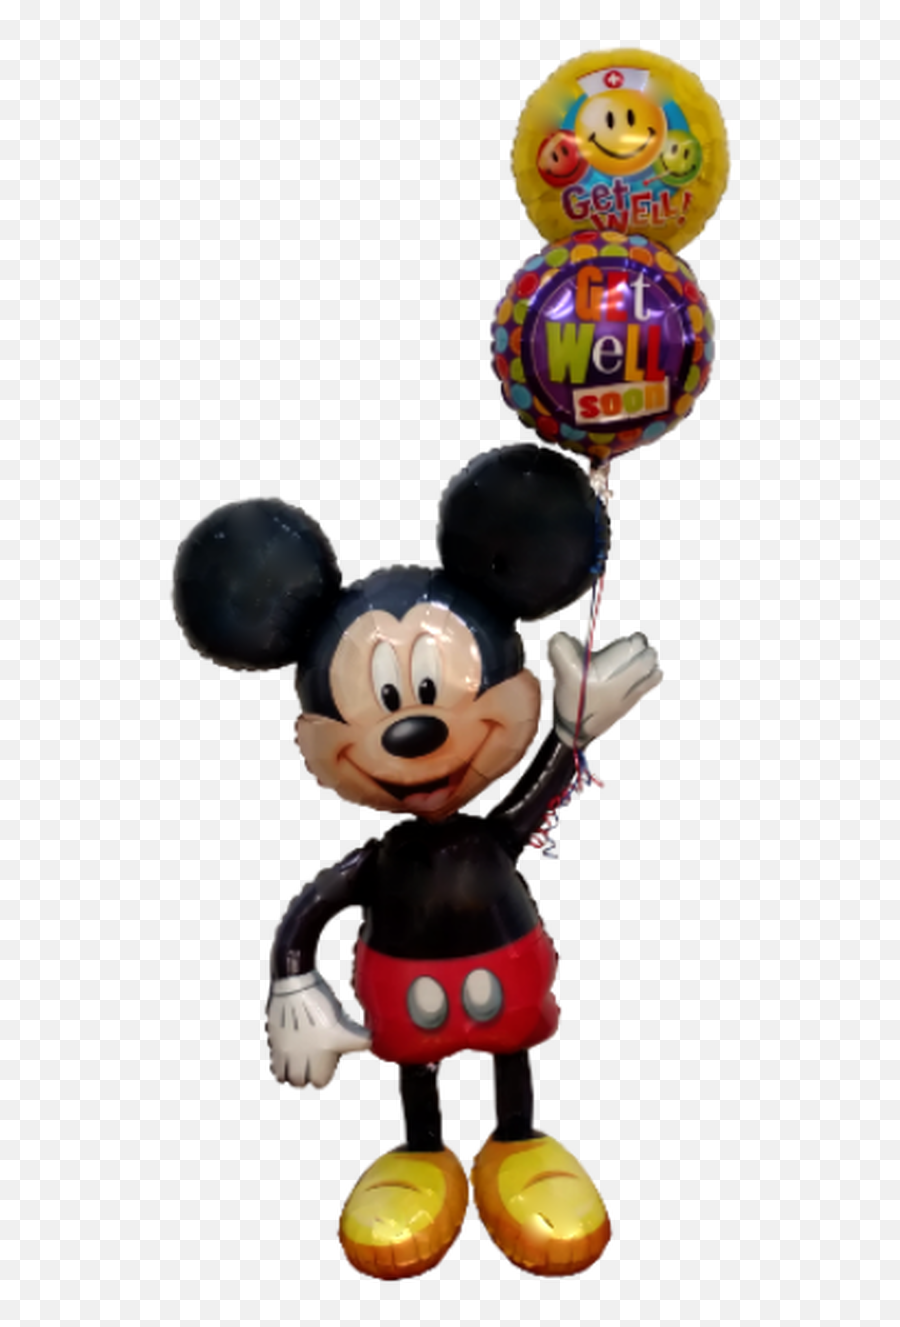 Get Well Mickey Mouse Airwalker - Mickey Emoji,Mickey Mouse Emoticon